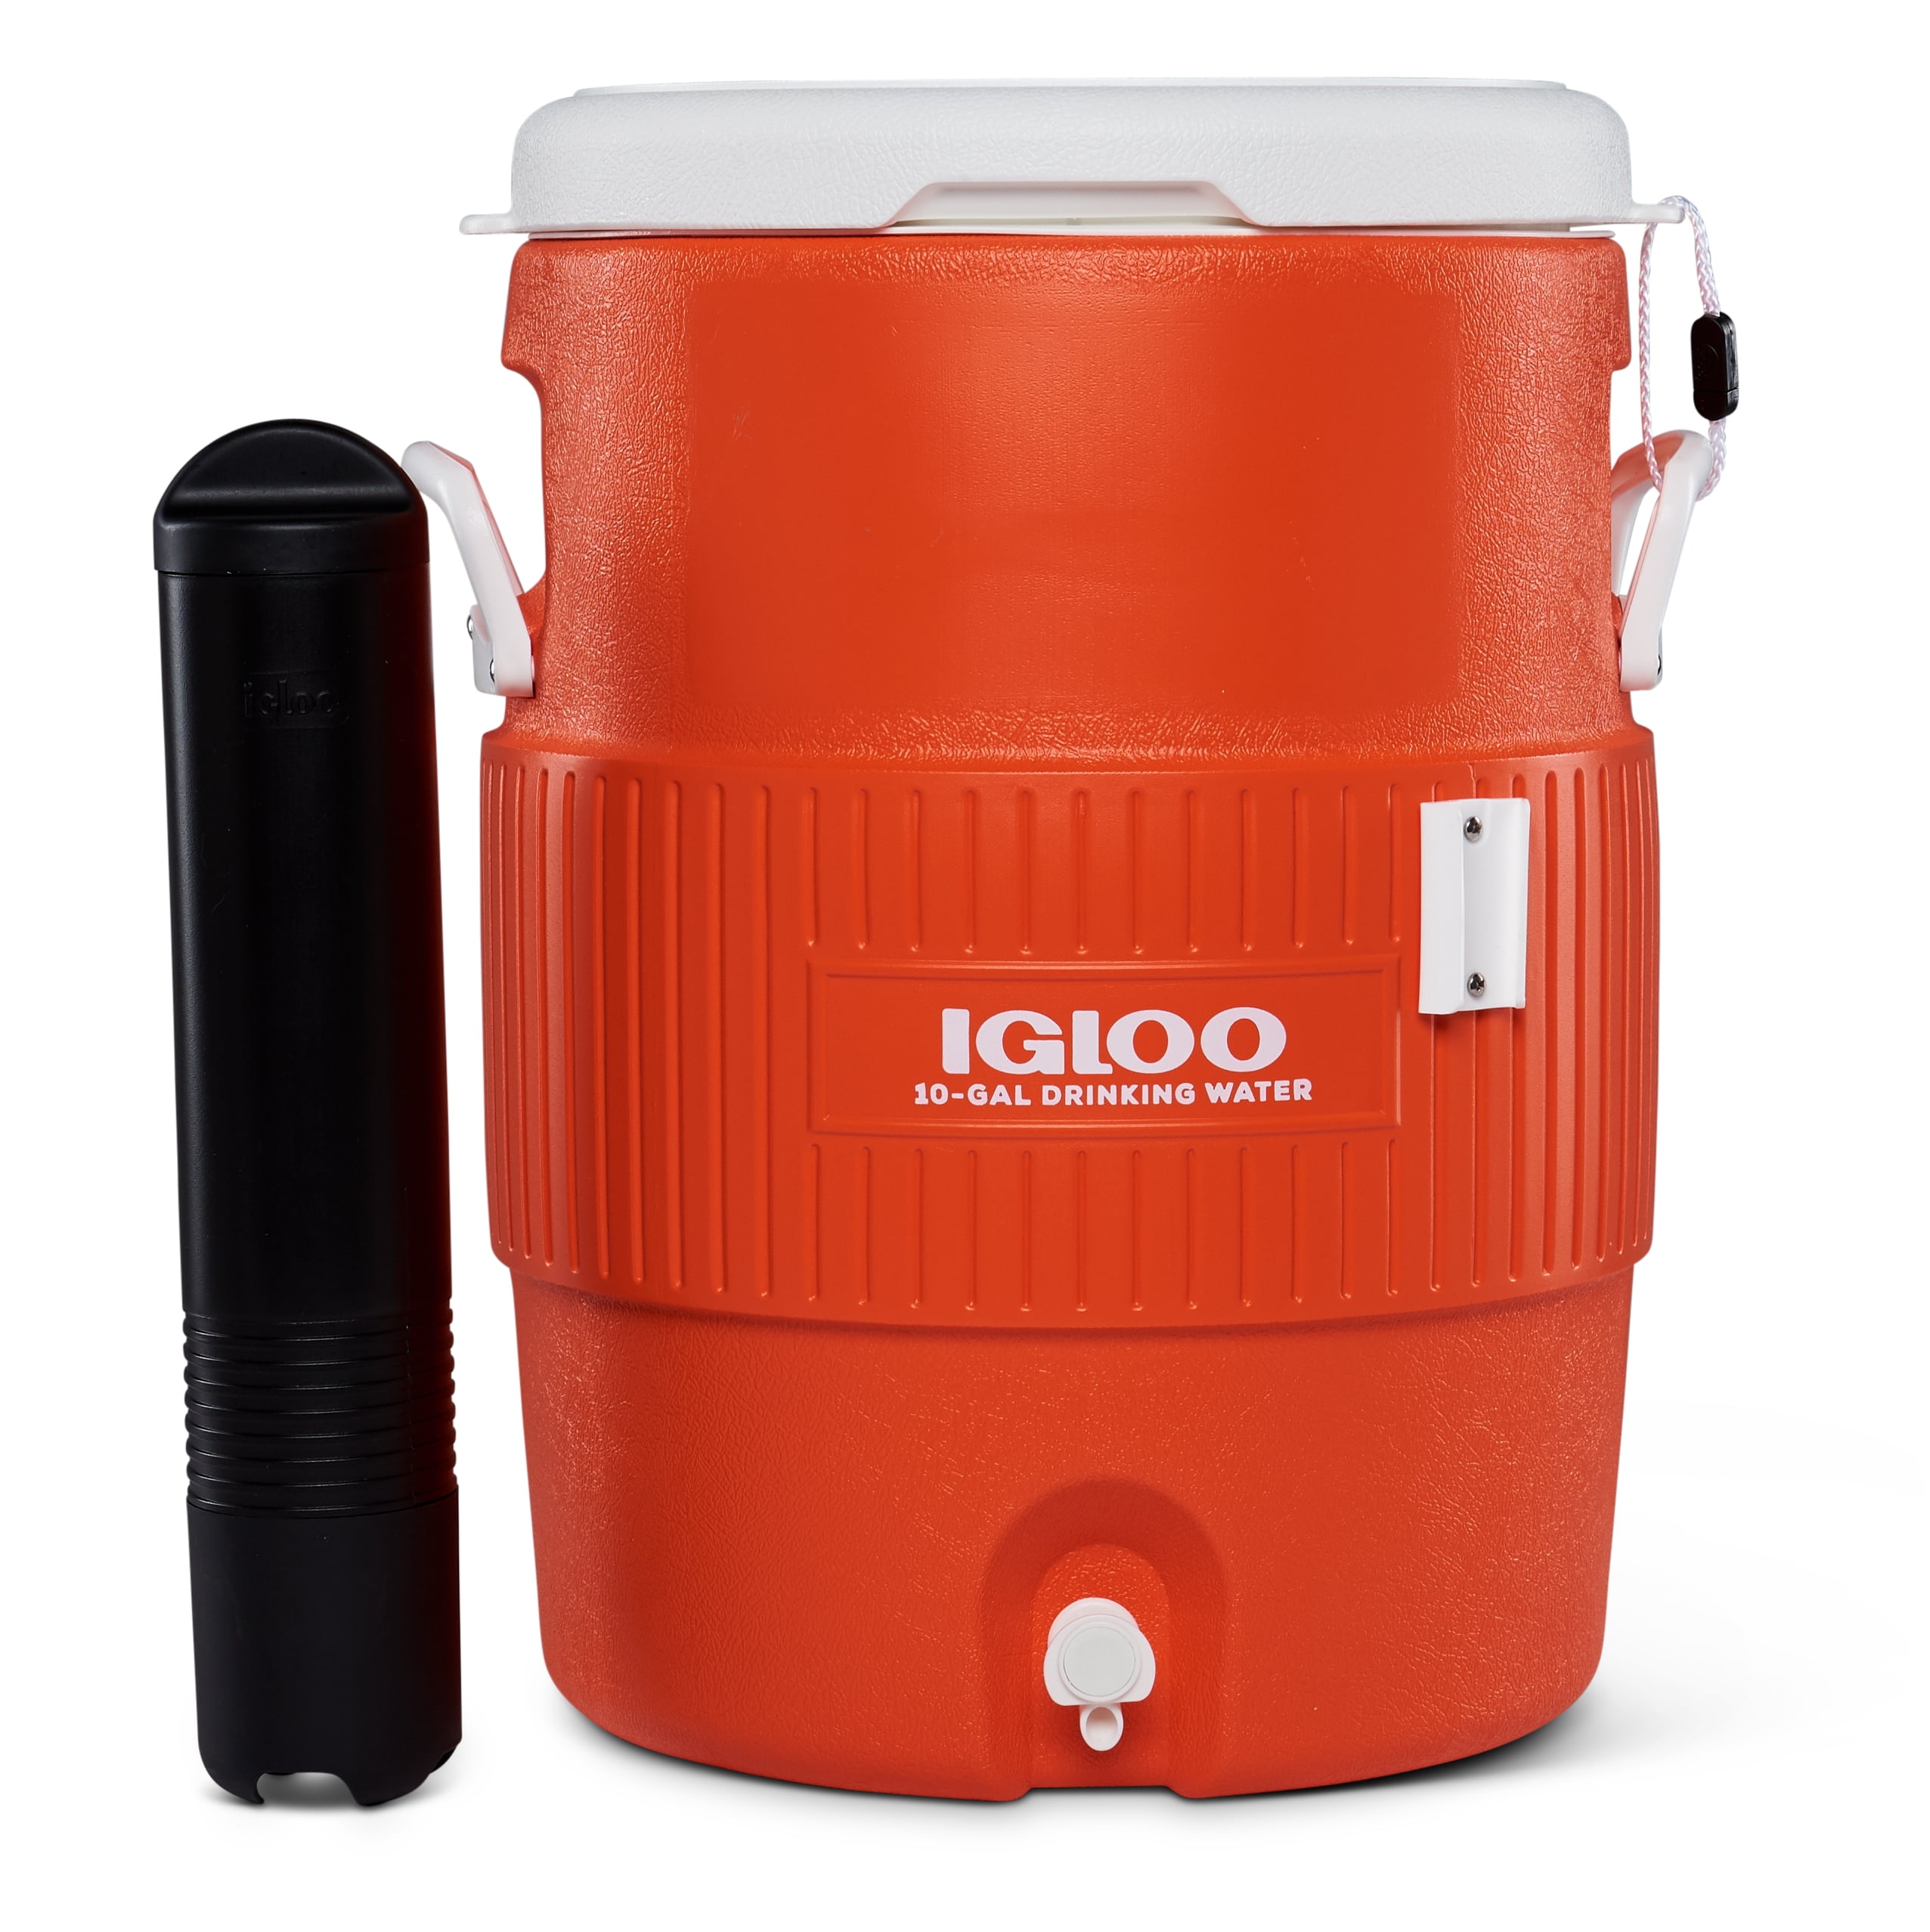 Igloo 5 Gallon Seat Top Beverage Jug with spigot Free Shipping 